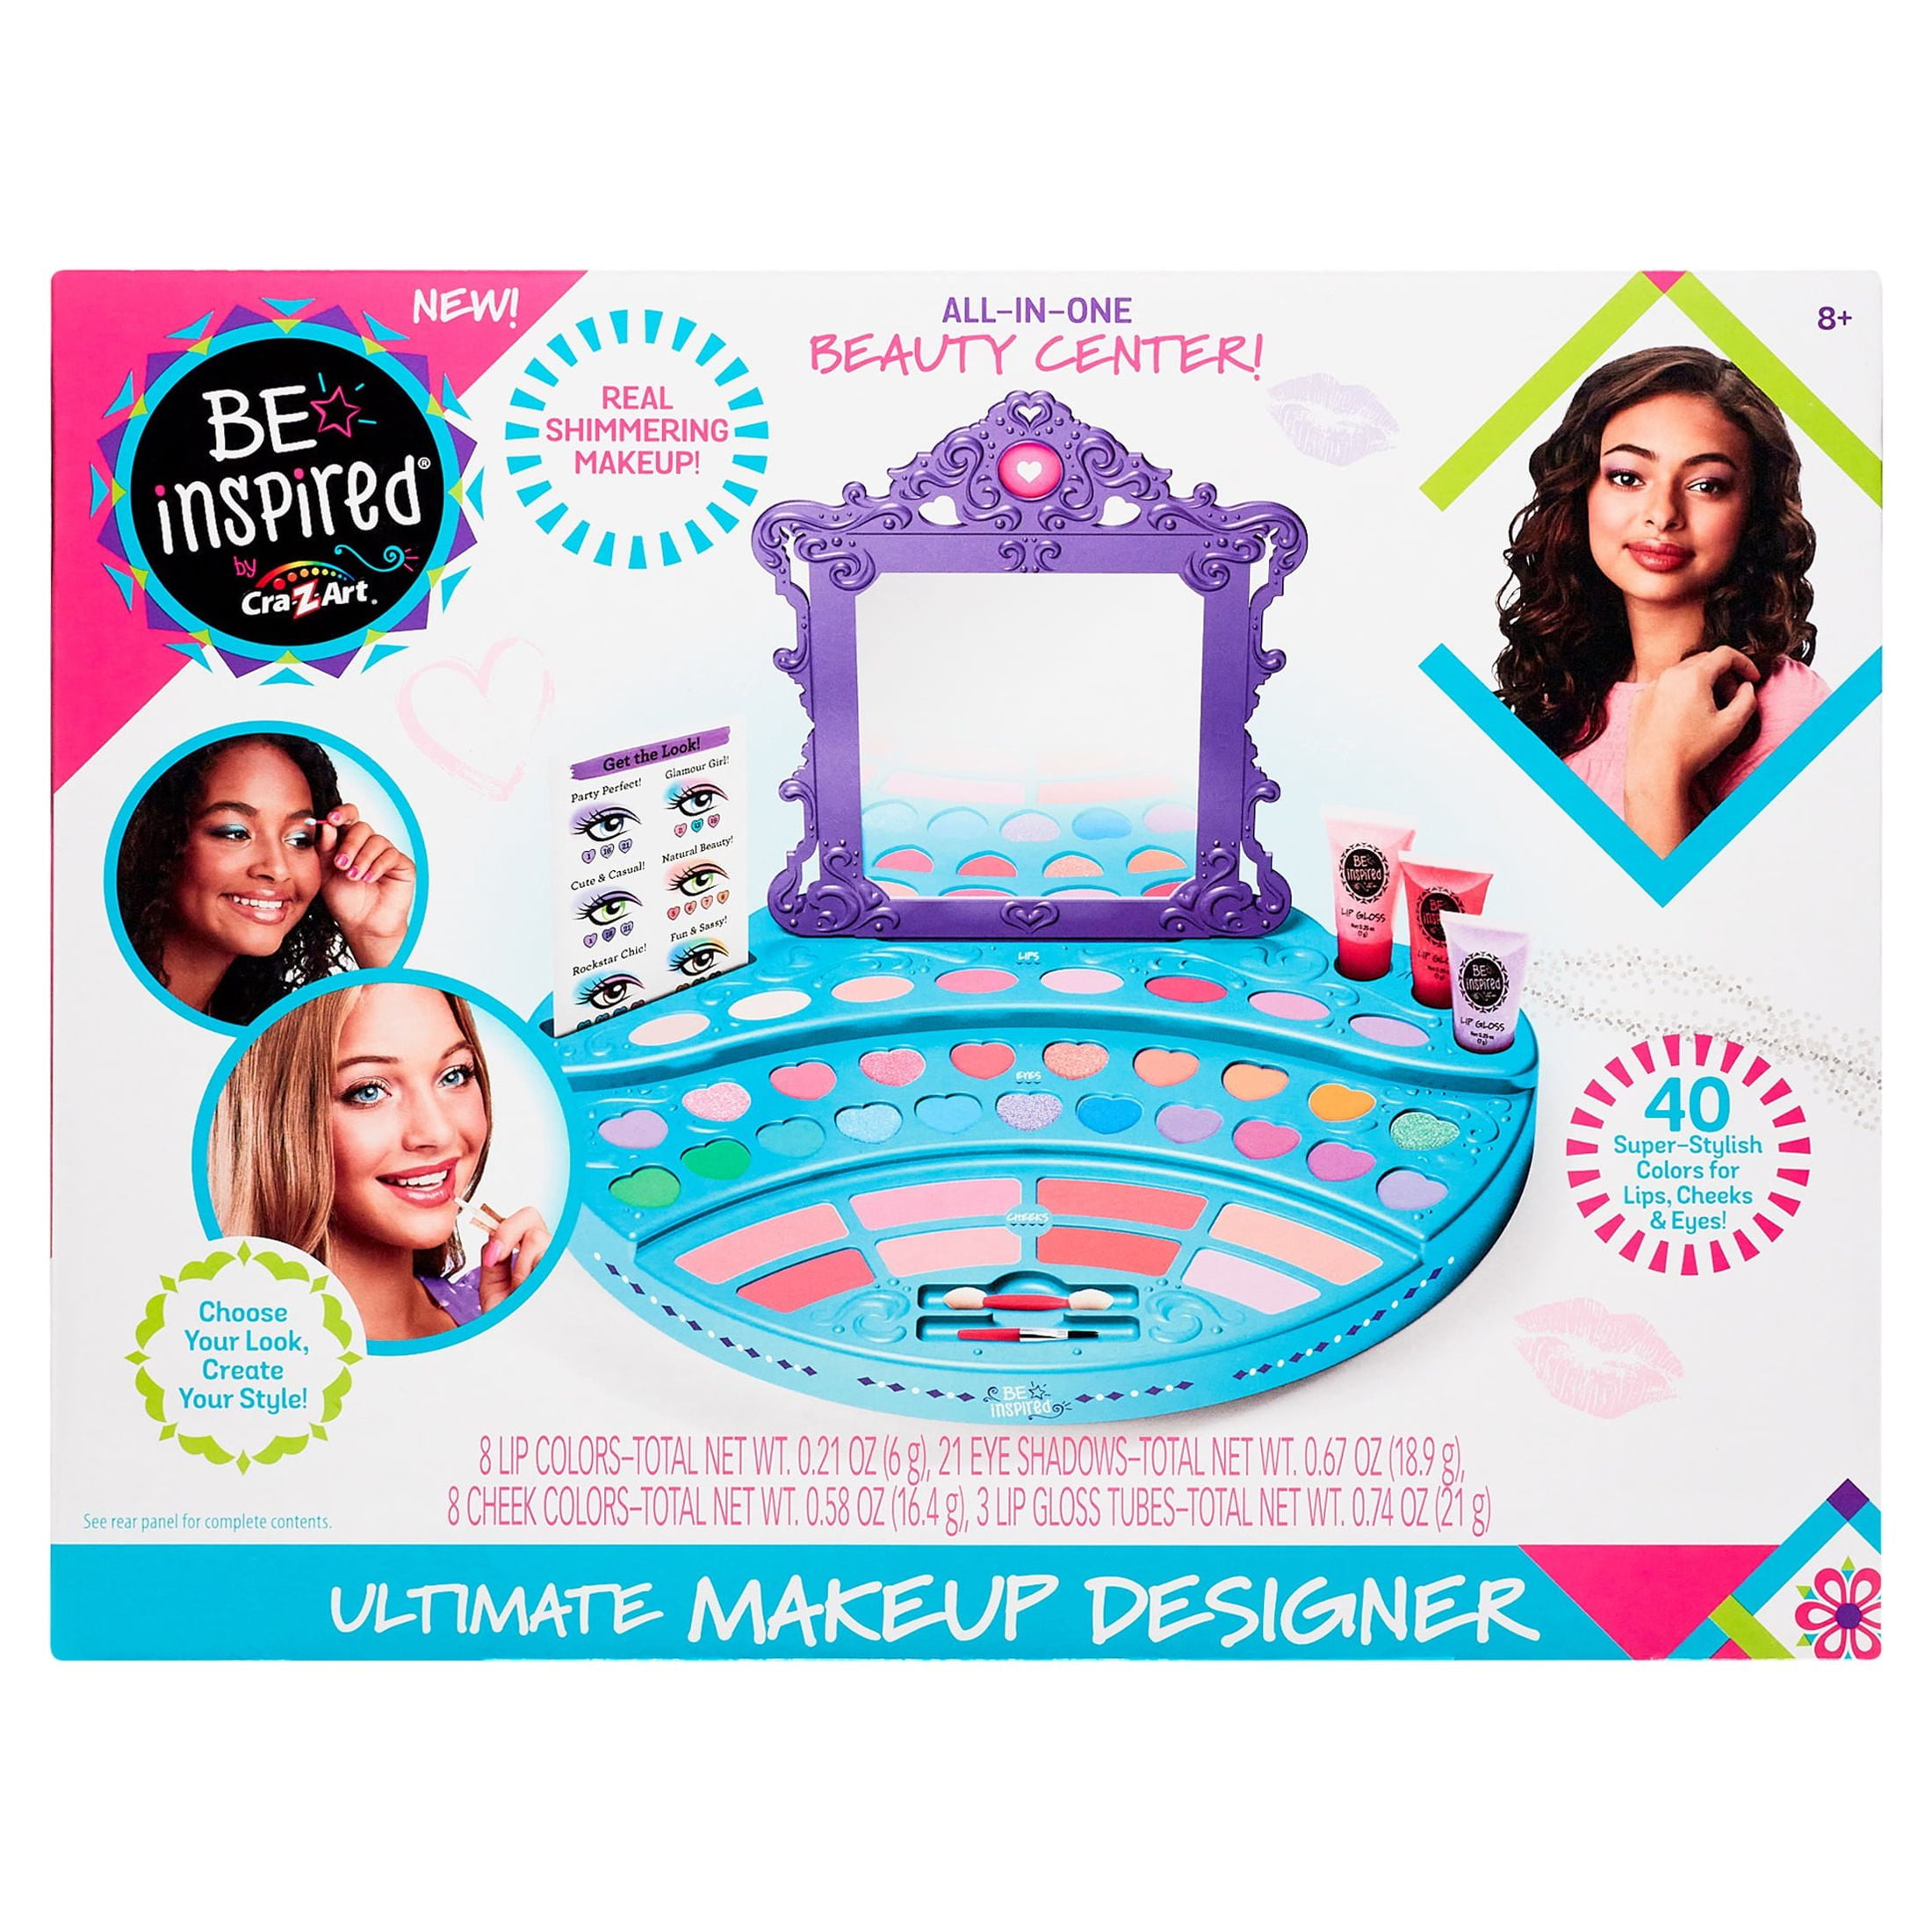 MAKEUP ARTIST KIT ESSENTIALS on Instagram: Hope everyone had a wonderful  new year. I like to introduce this new addition to AKC called “Digital  Education”. It will a collection of educational materials